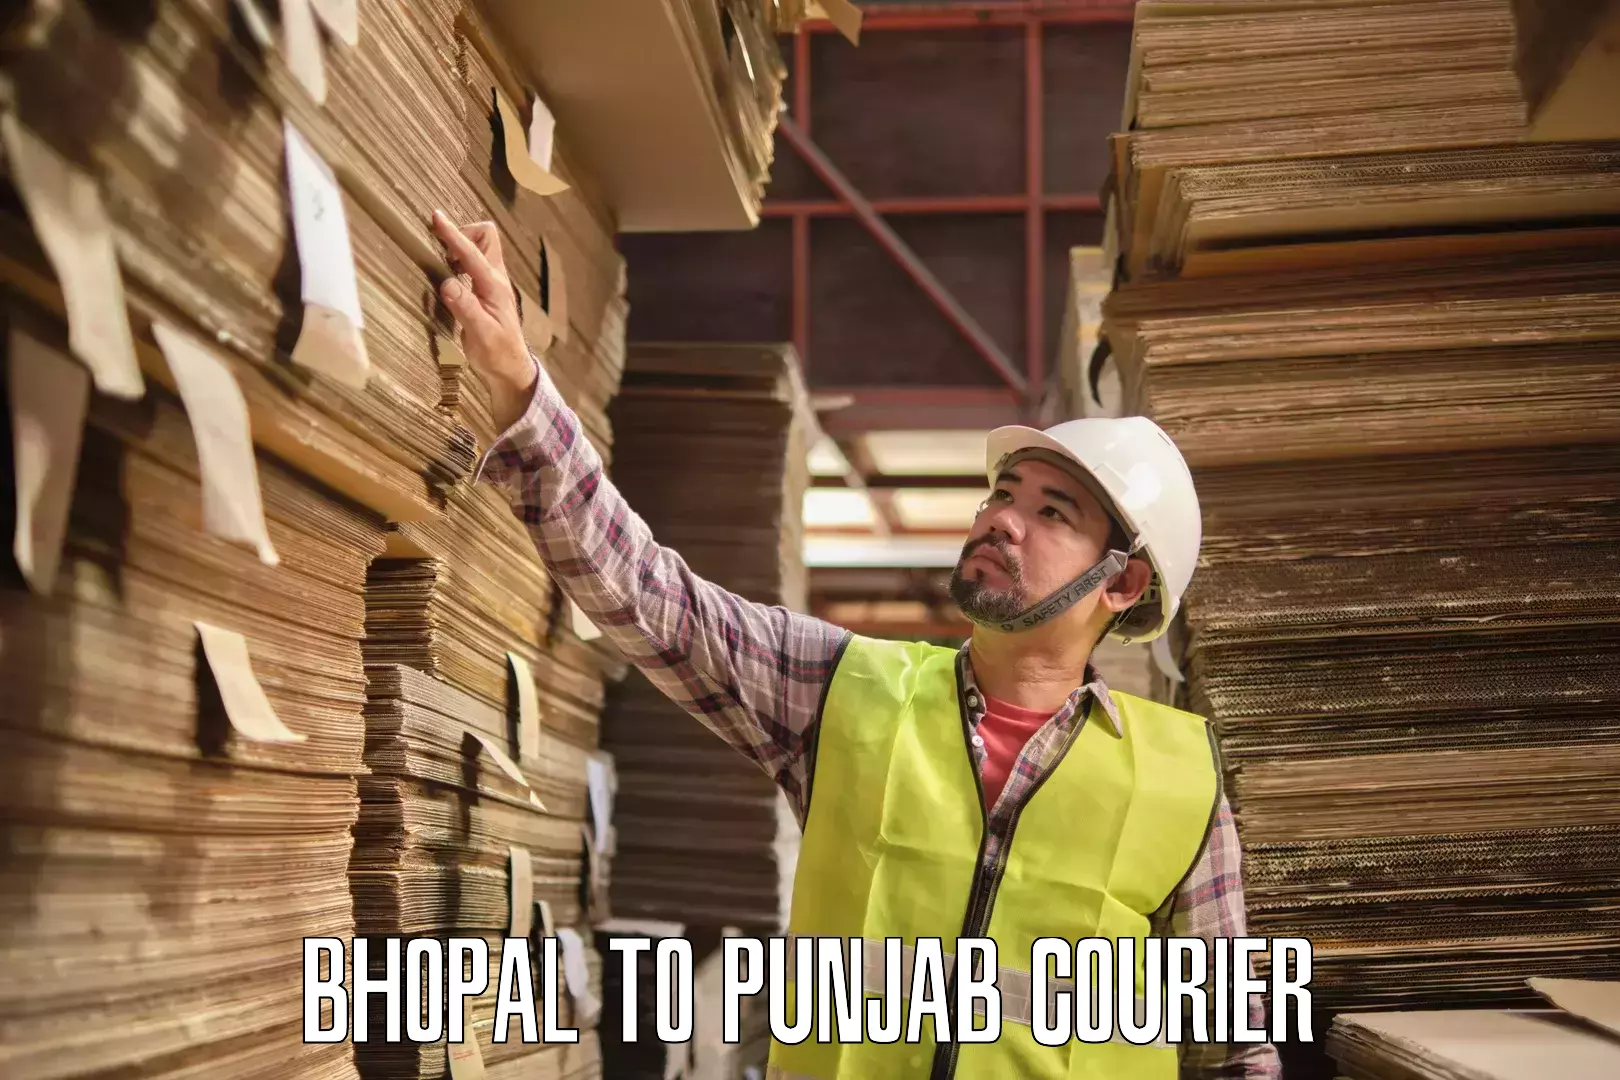 User-friendly delivery service Bhopal to Punjab